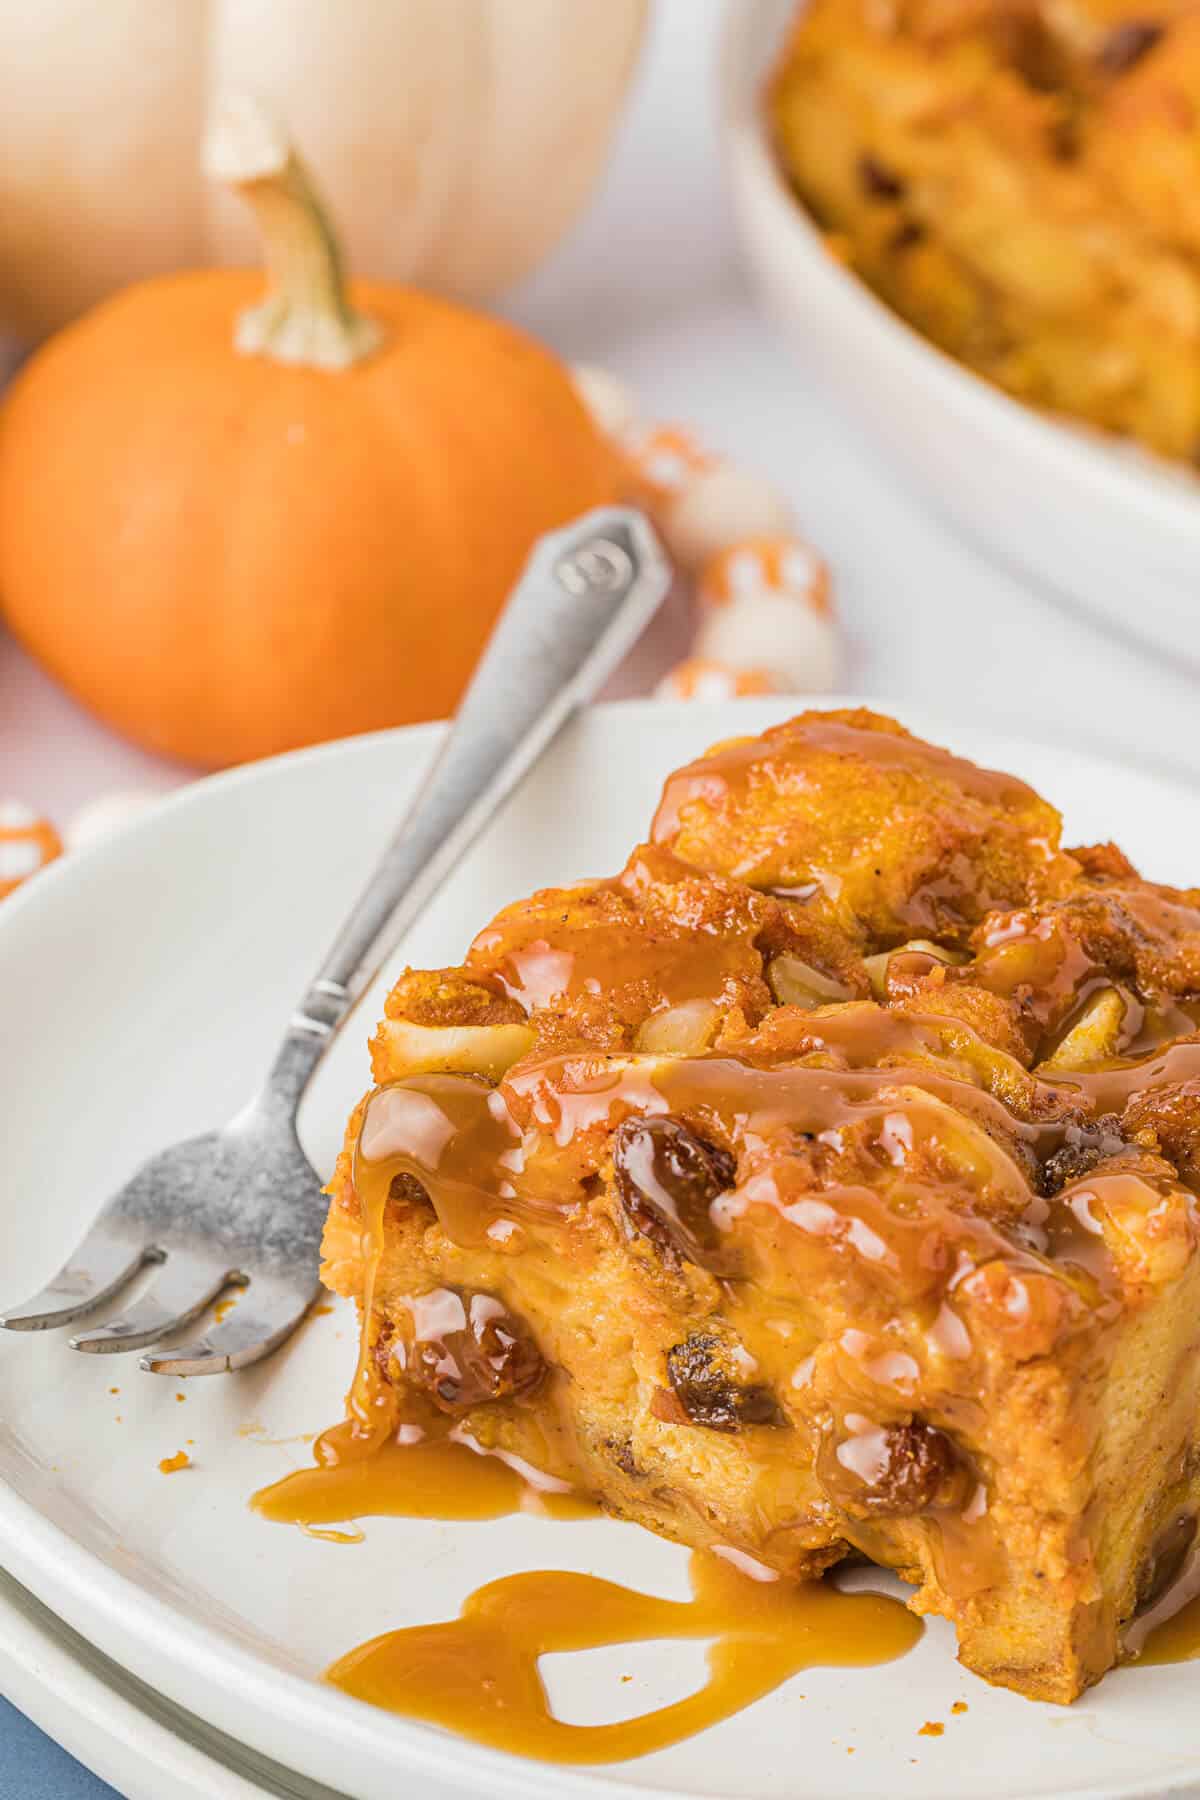 A piece of pumpkin bread pudding on a plate.